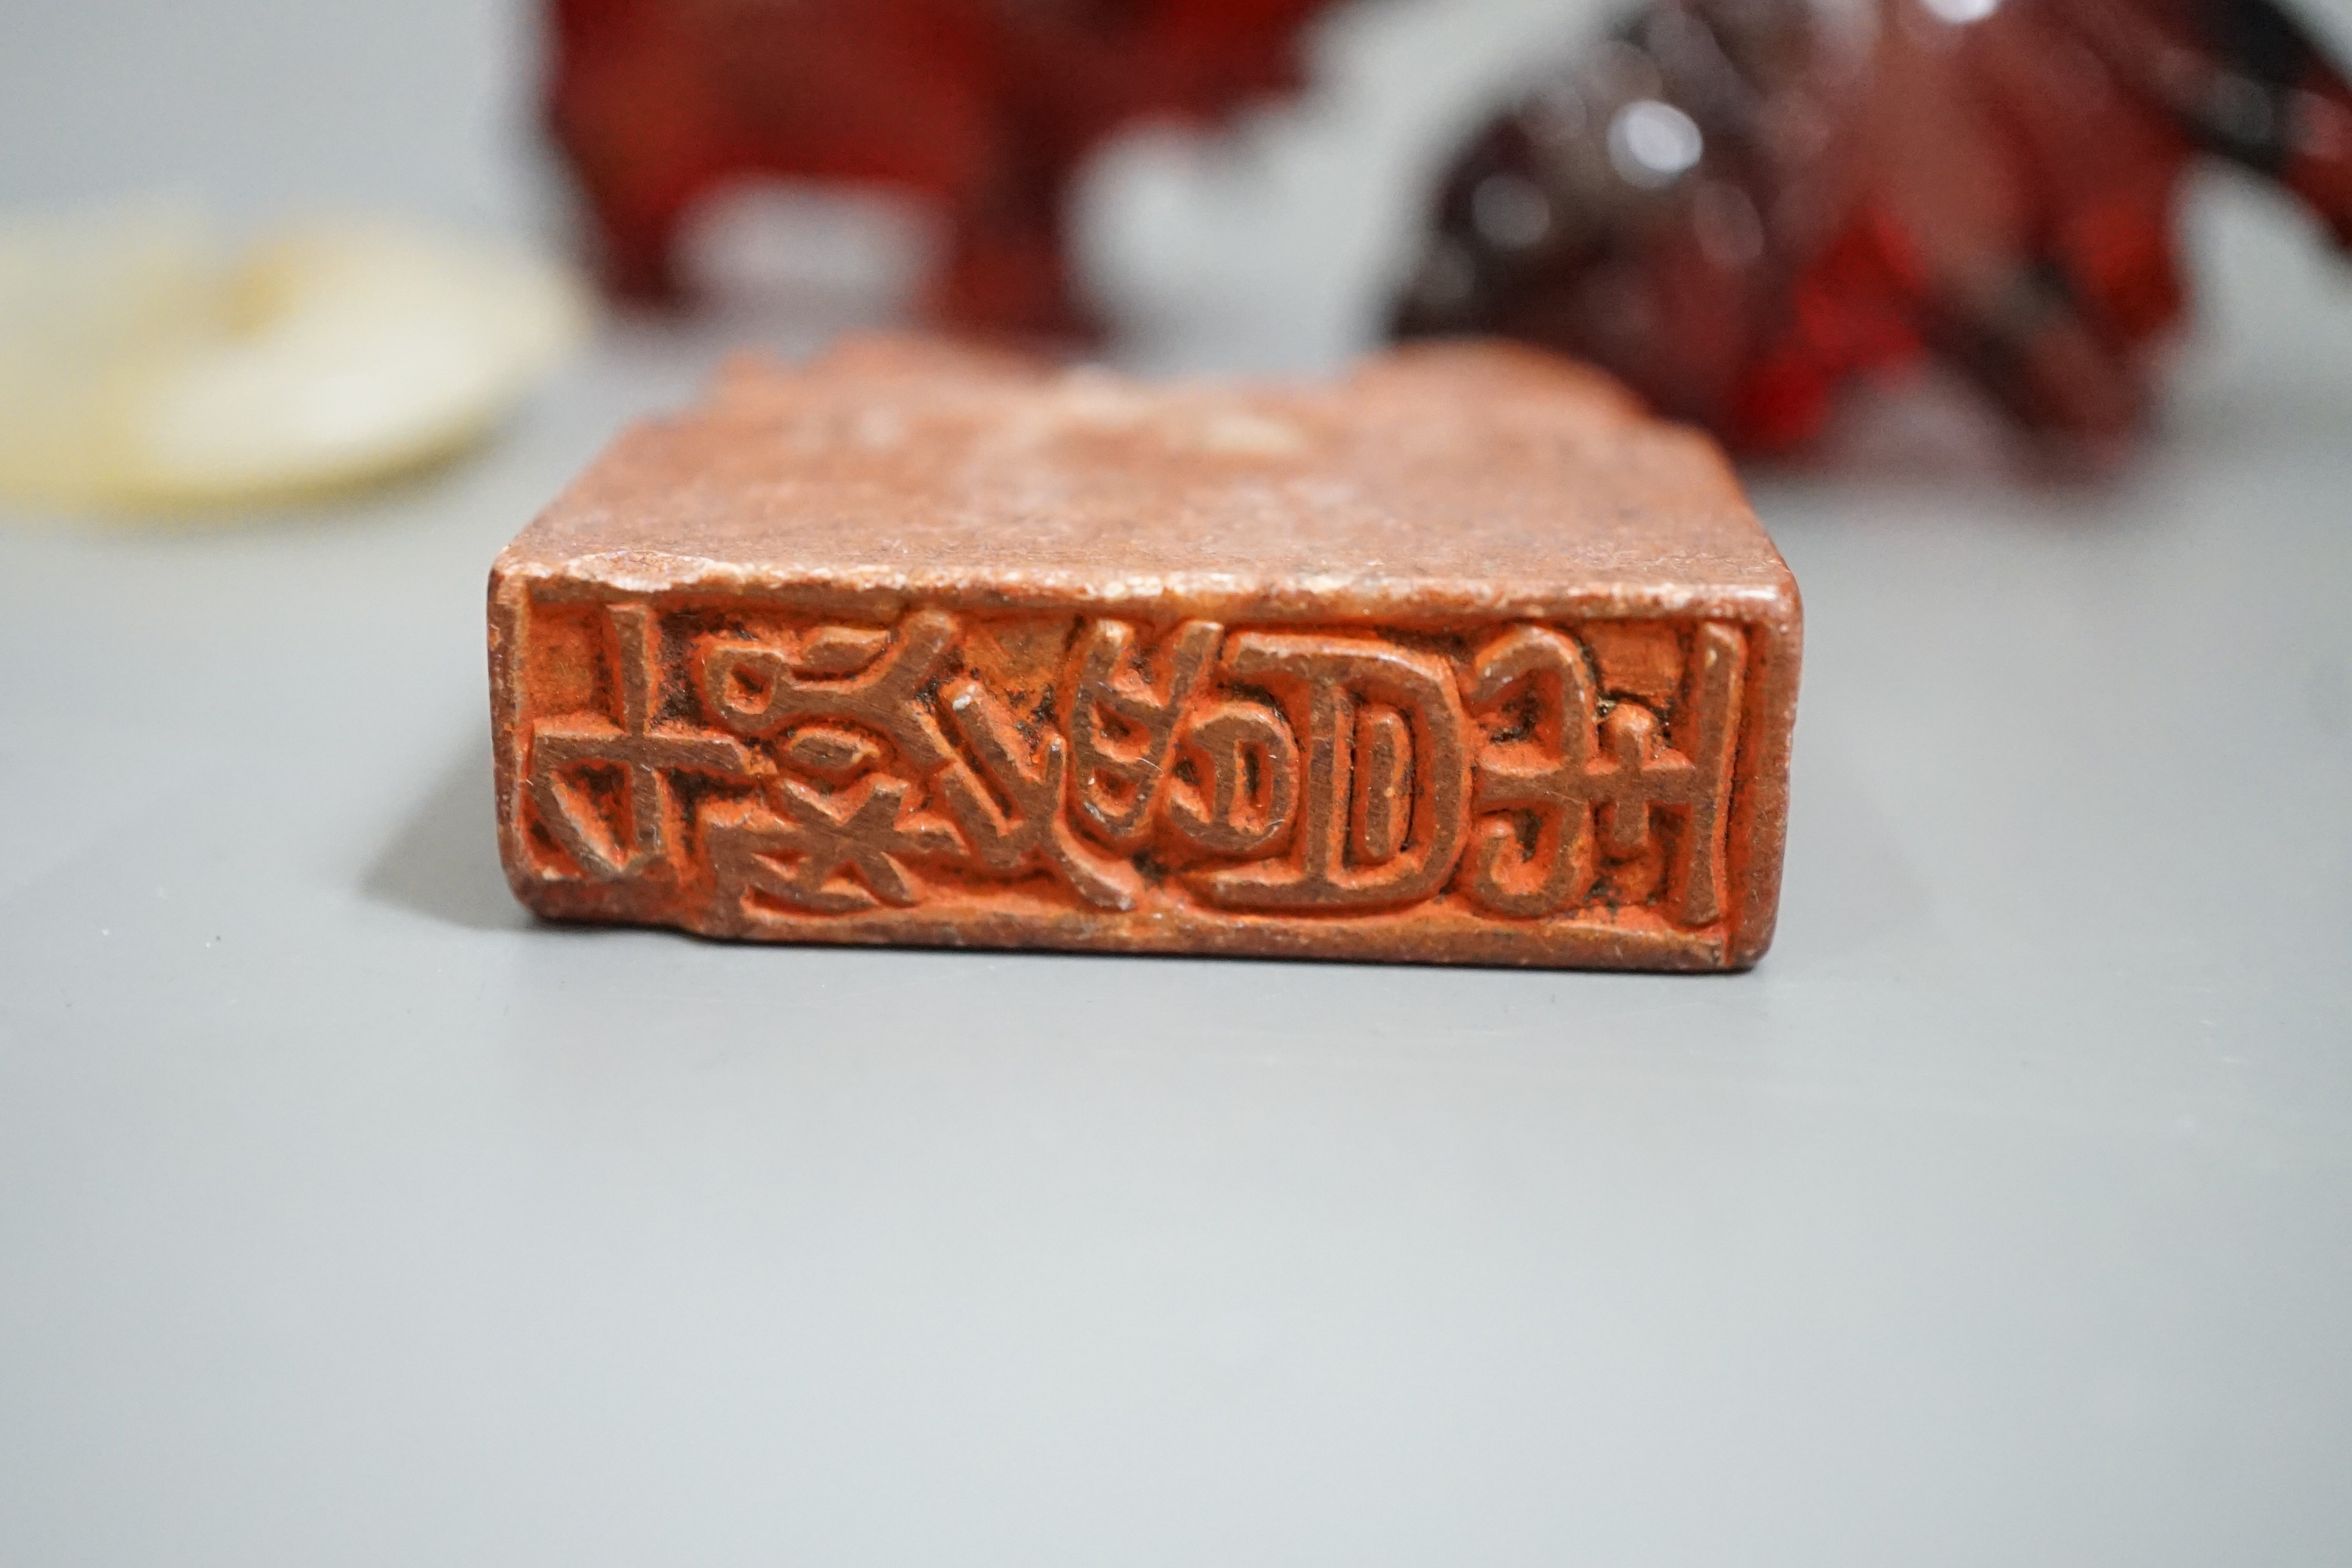 A Chinese Jade bi disc, two cherry amber ox and a soapstone seal